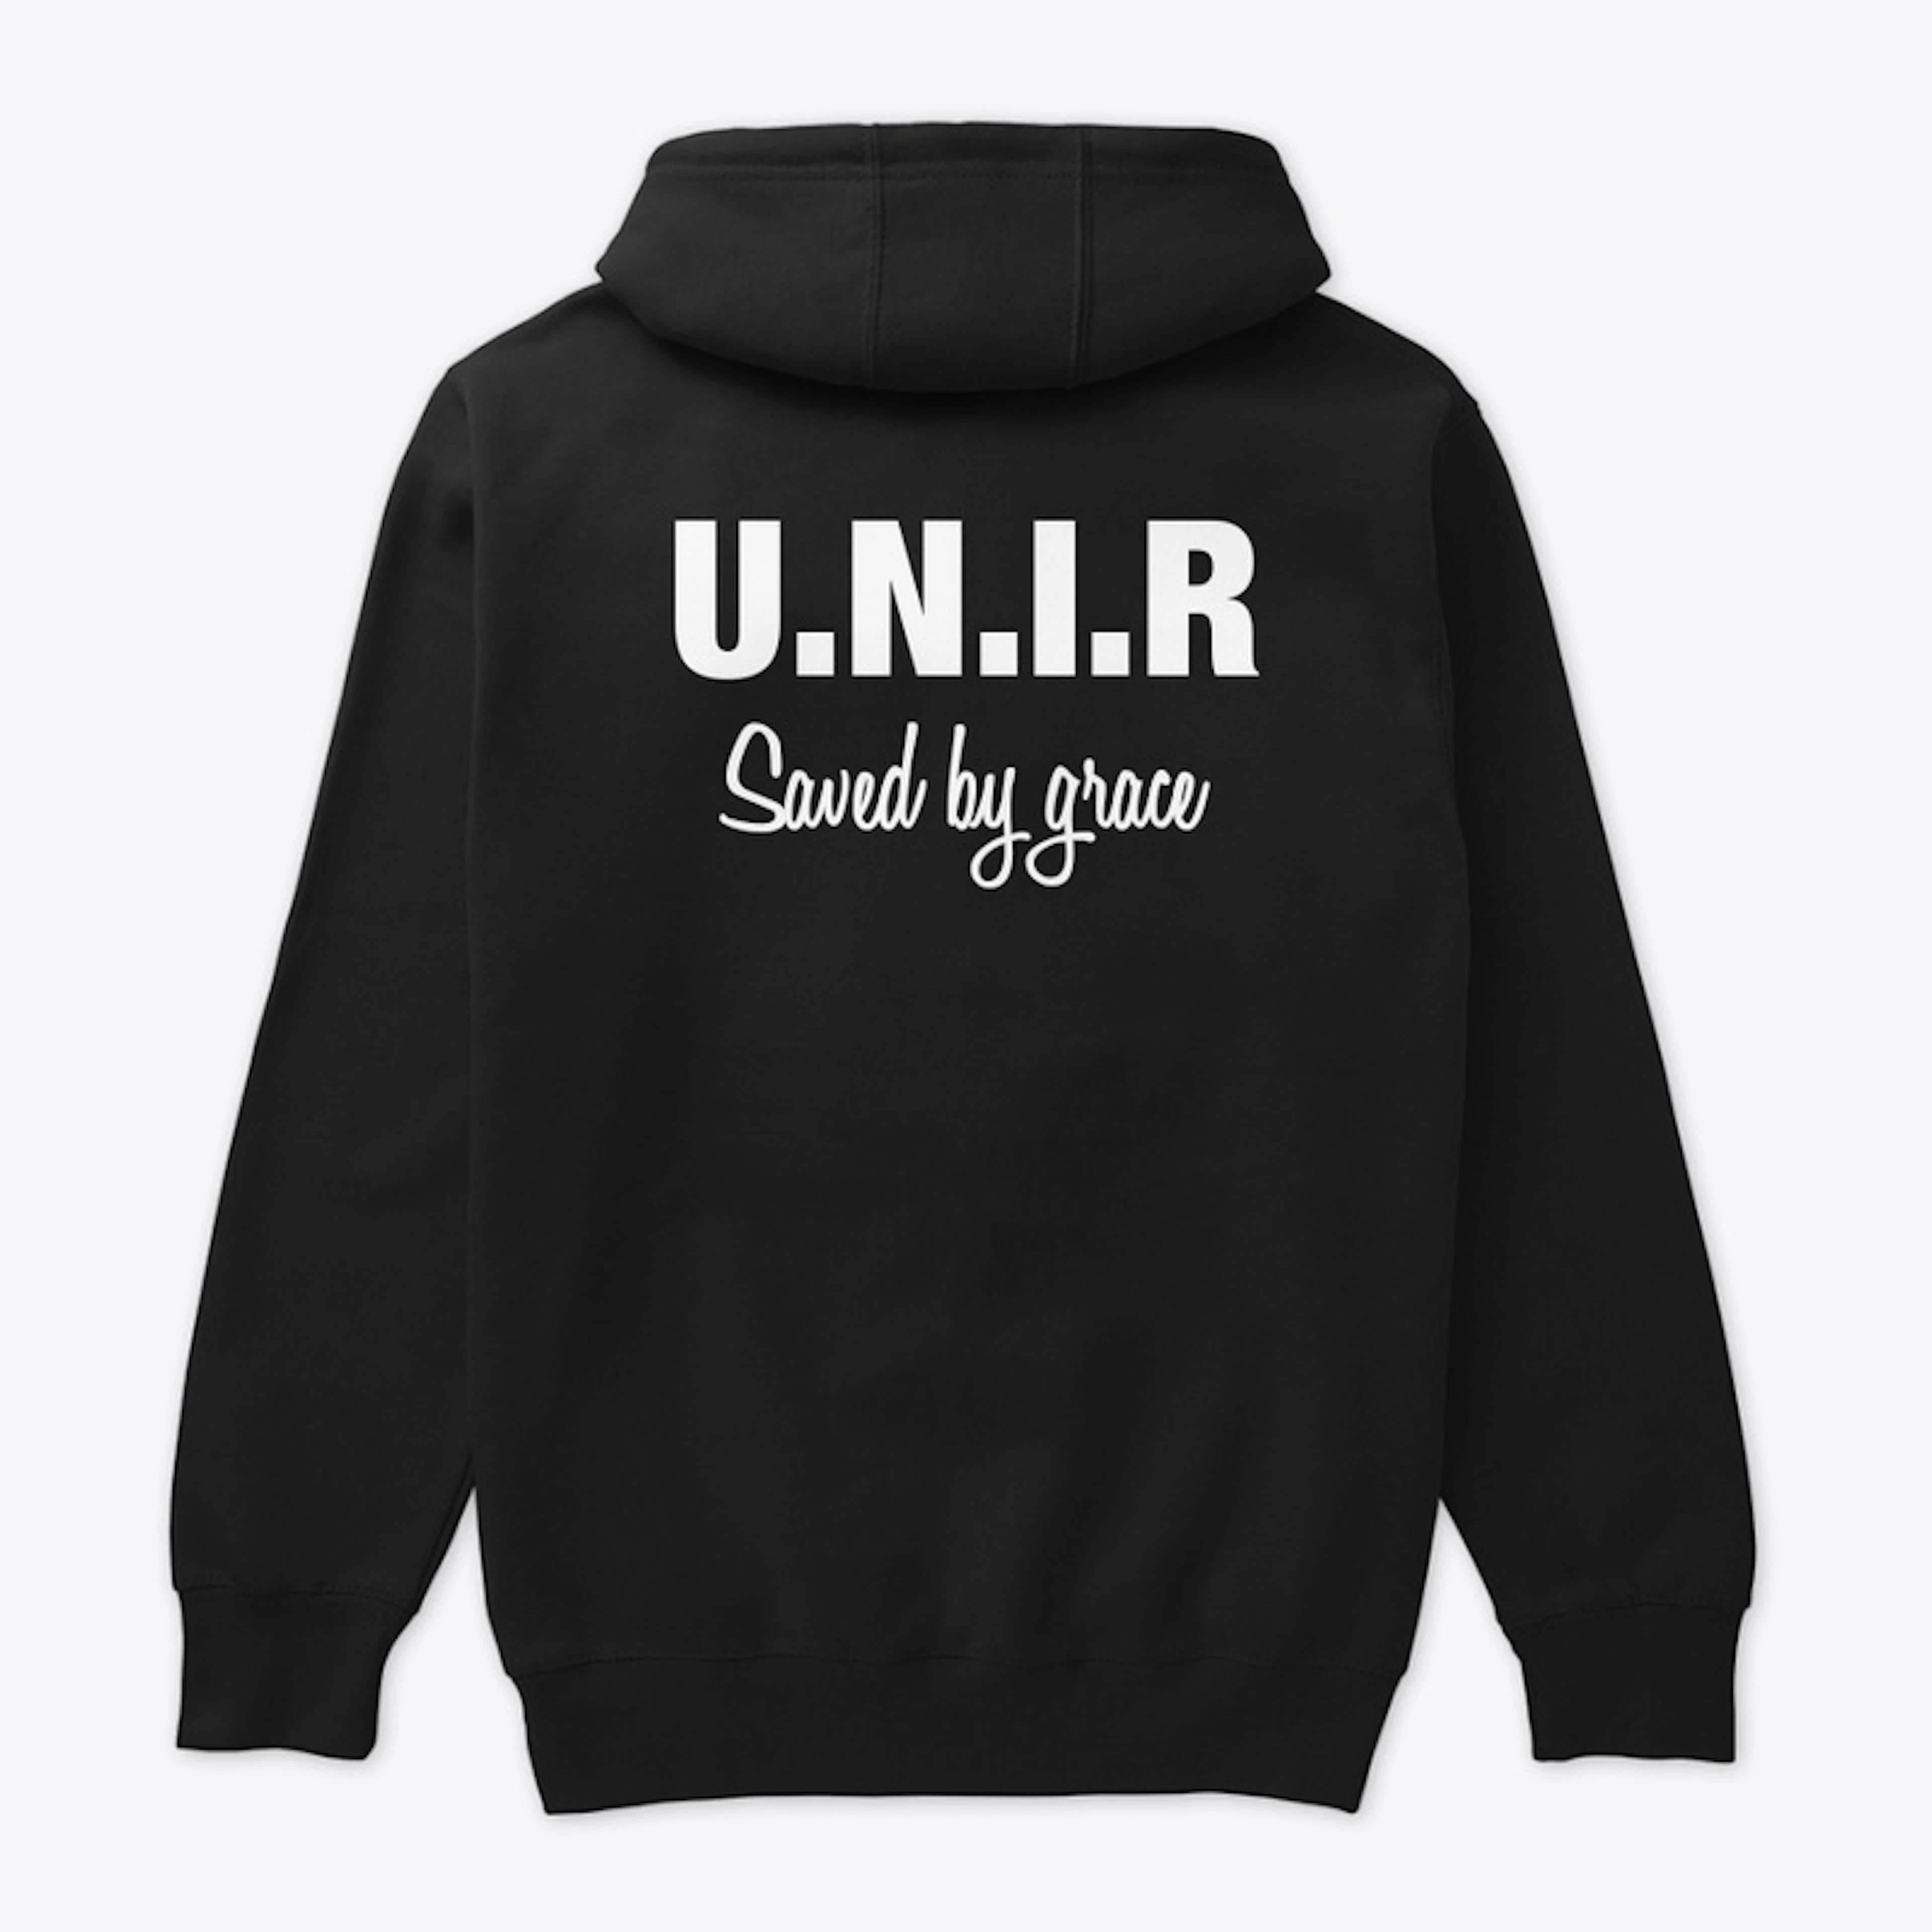 U.N.I.R.CAPABLE1S "BY GRACE"